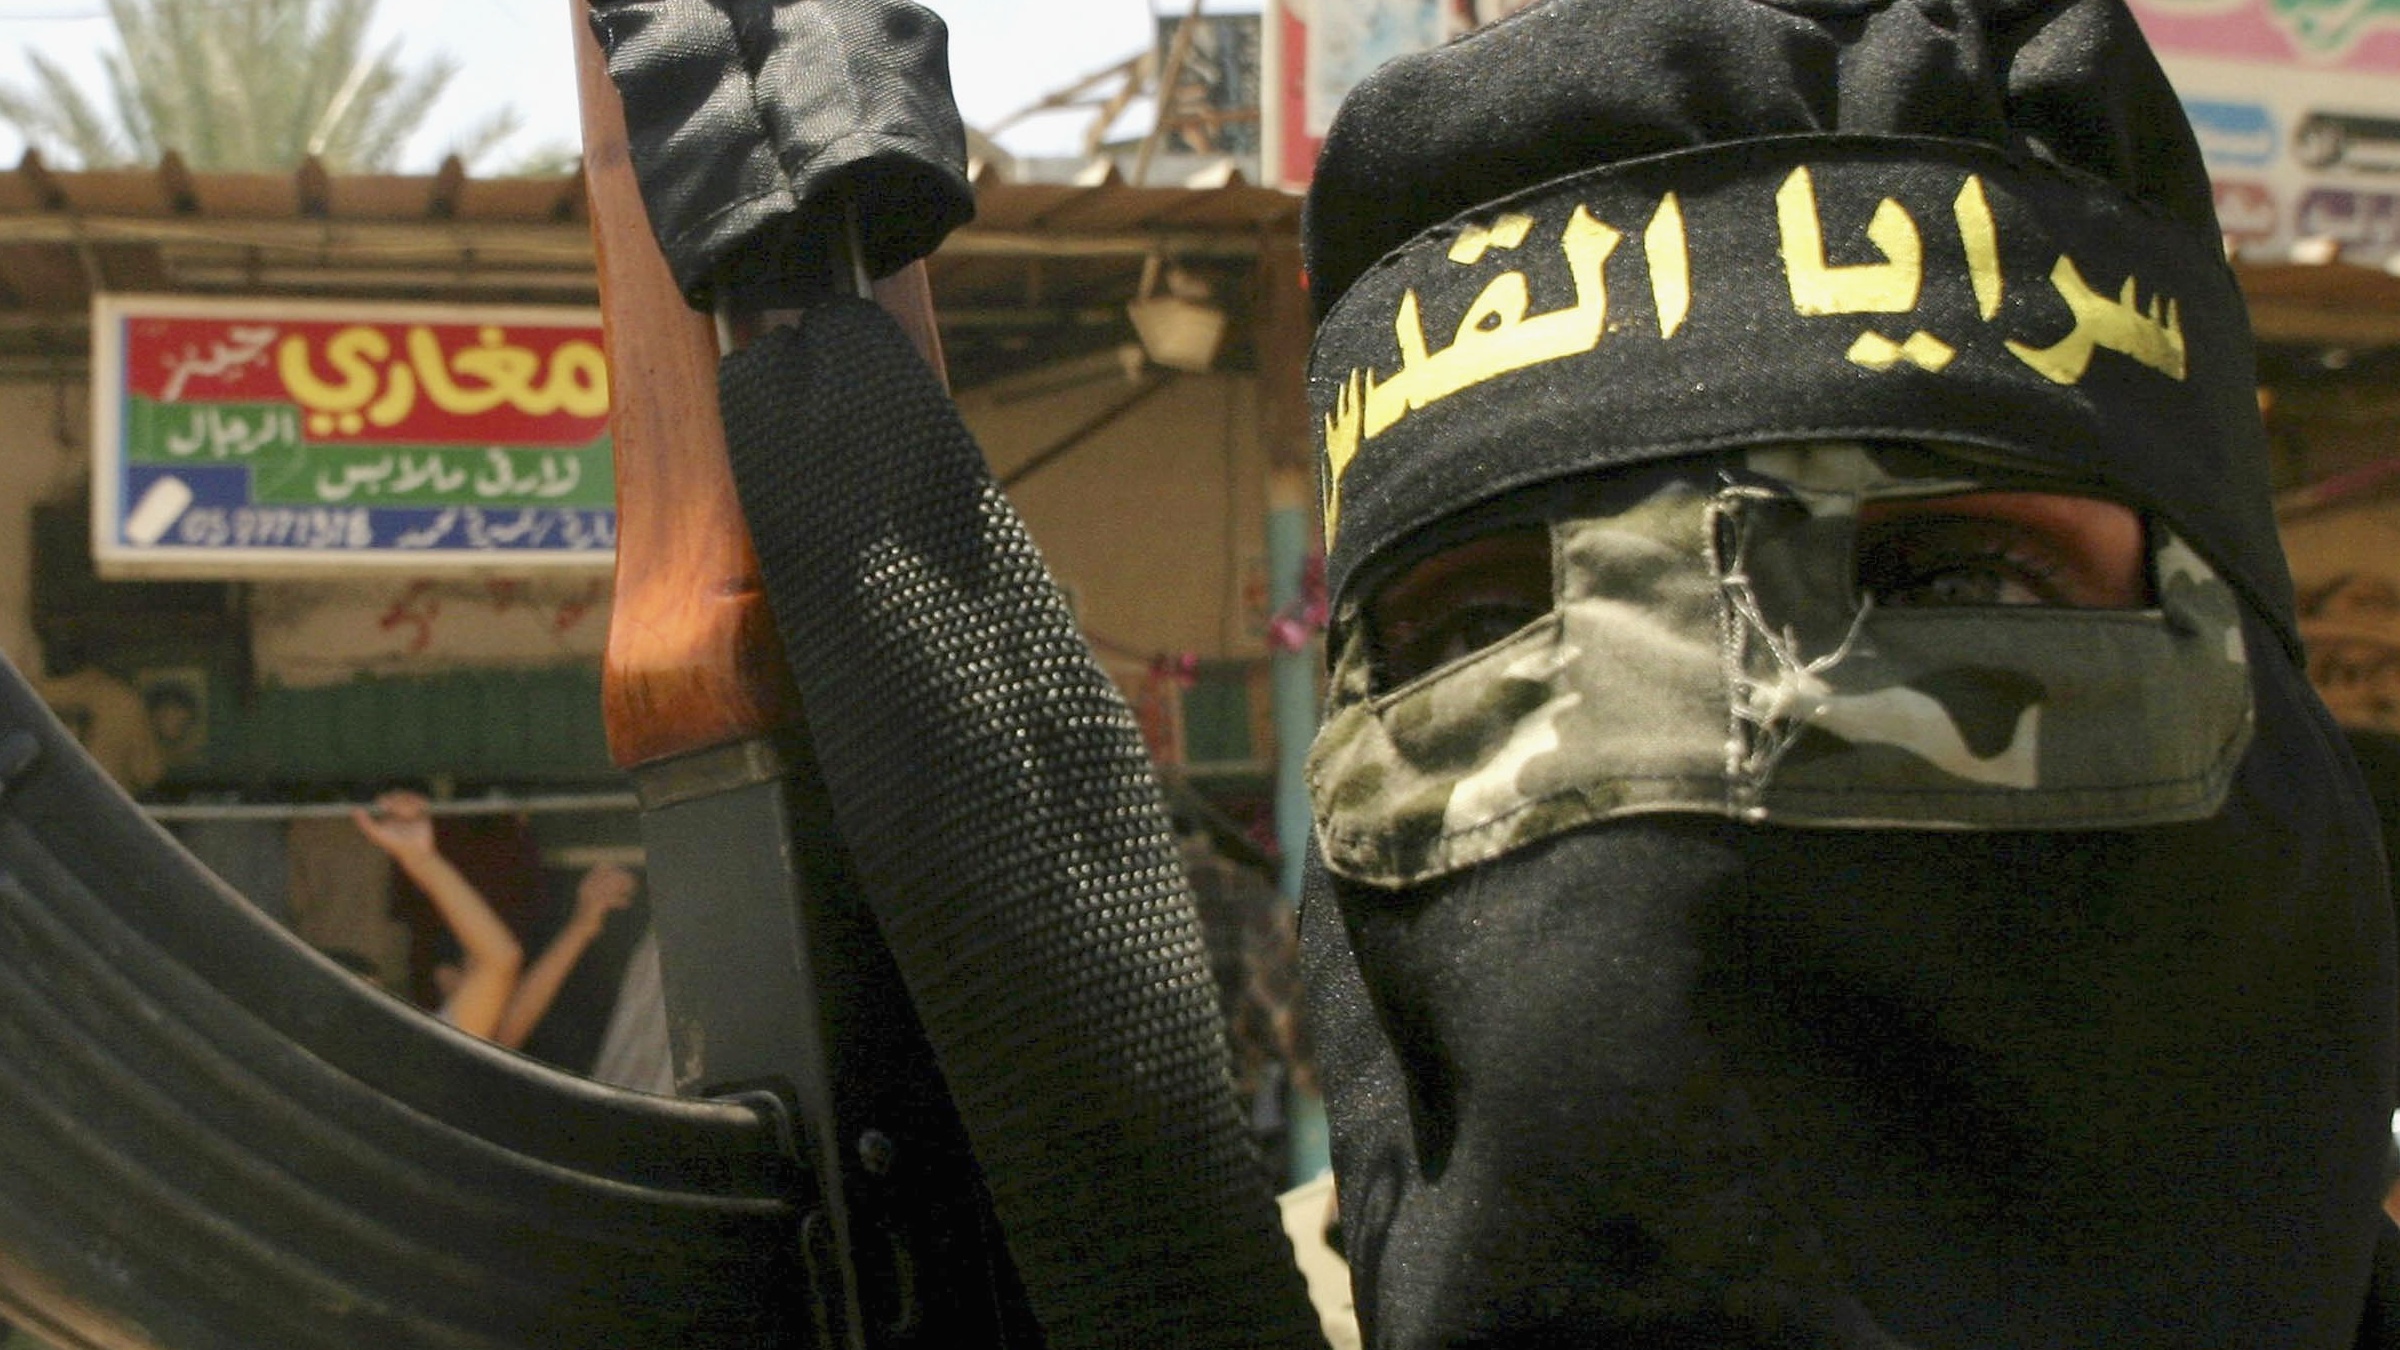 A member of Palestinian militant group Islamic Jihad pictured in 2004